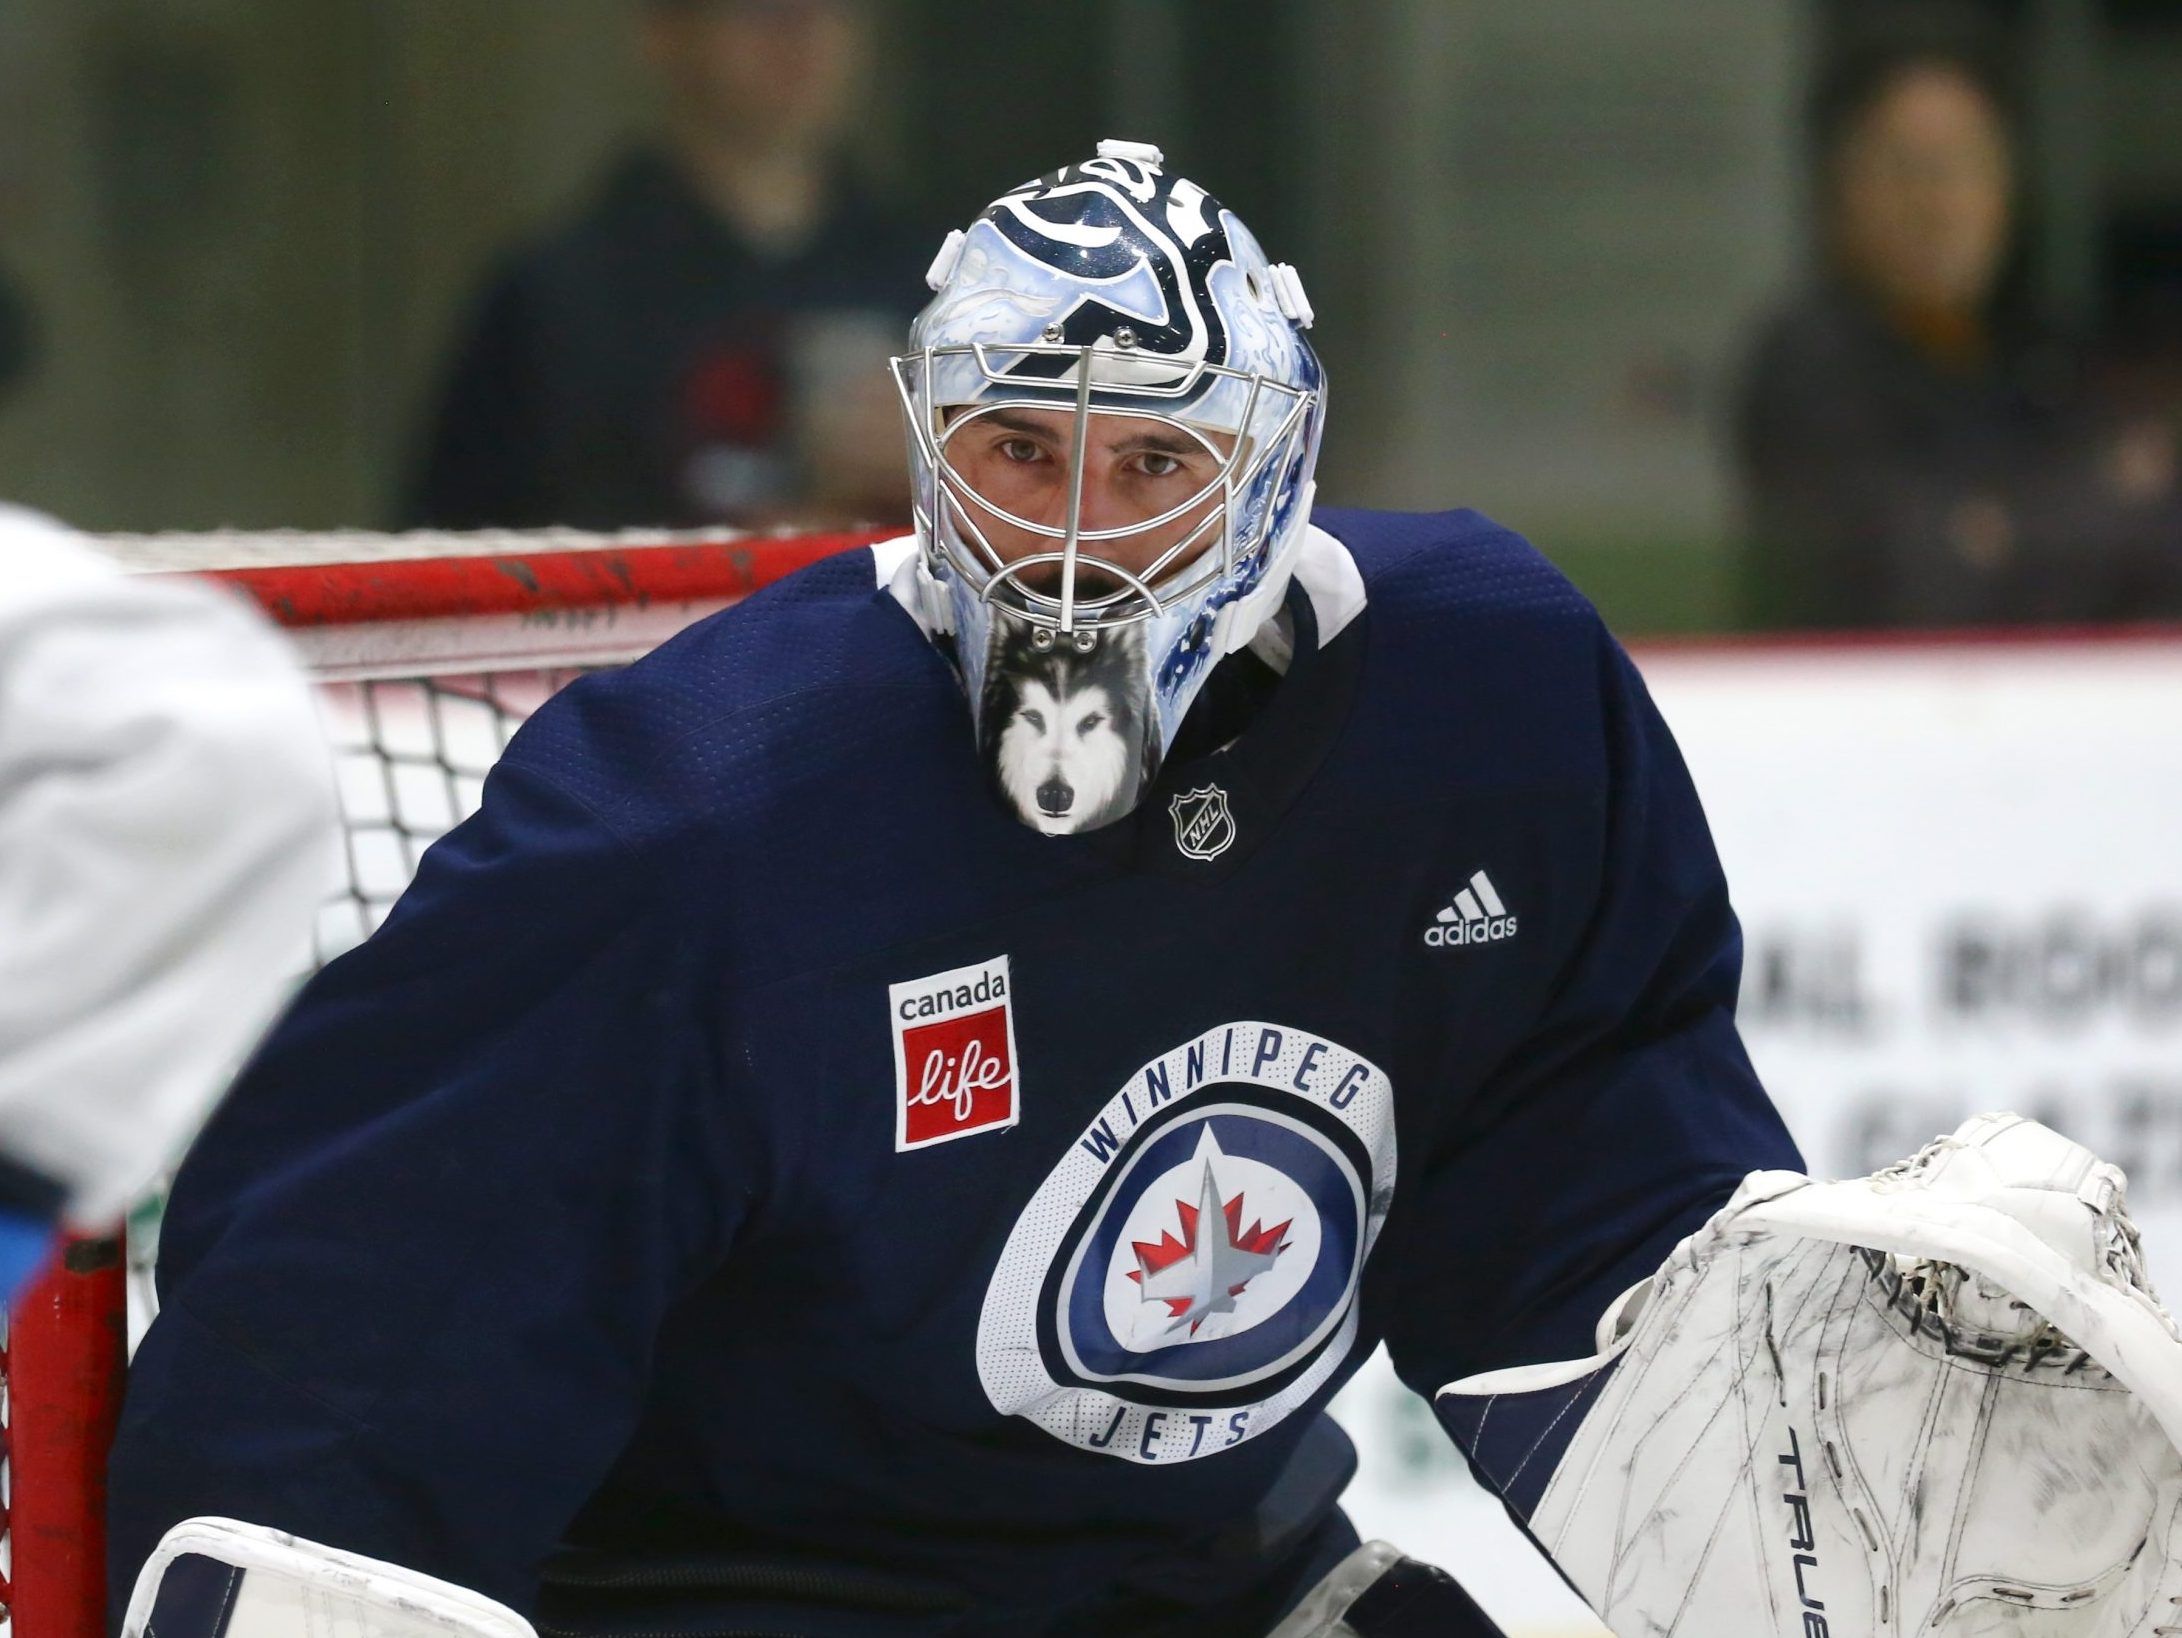 Friesen: Jets’ Hellebuyck, Scheifele, here for a good time, if not much longer